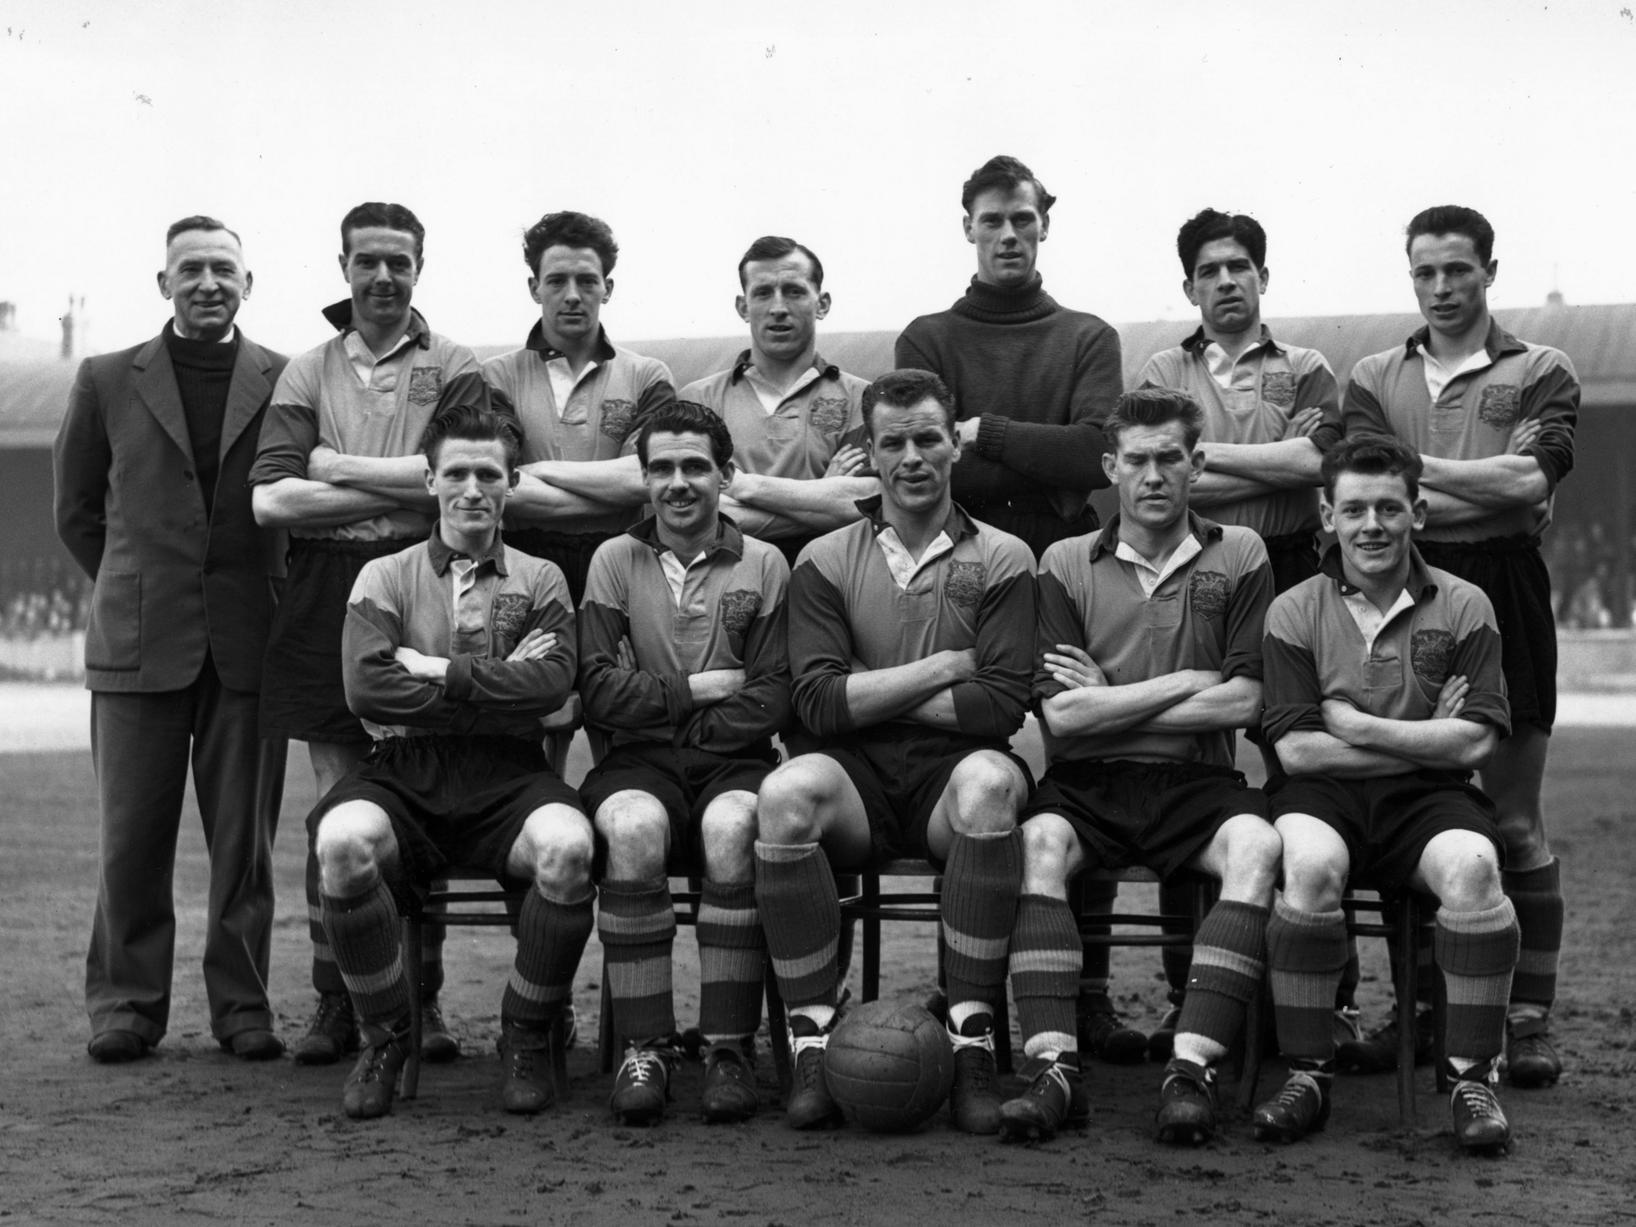 Leeds United team photo. Standing left to right - Bob Roxburgh (trainer), Harold Brook, Archie Gibson, Jimmy Dunn, Roy Wood, Eric Kerfoot, Grenville Hair. Front row left to right - Andy McCall, Albert Nightingale, John Charles (captain), Bobby Forrest, George Meek.